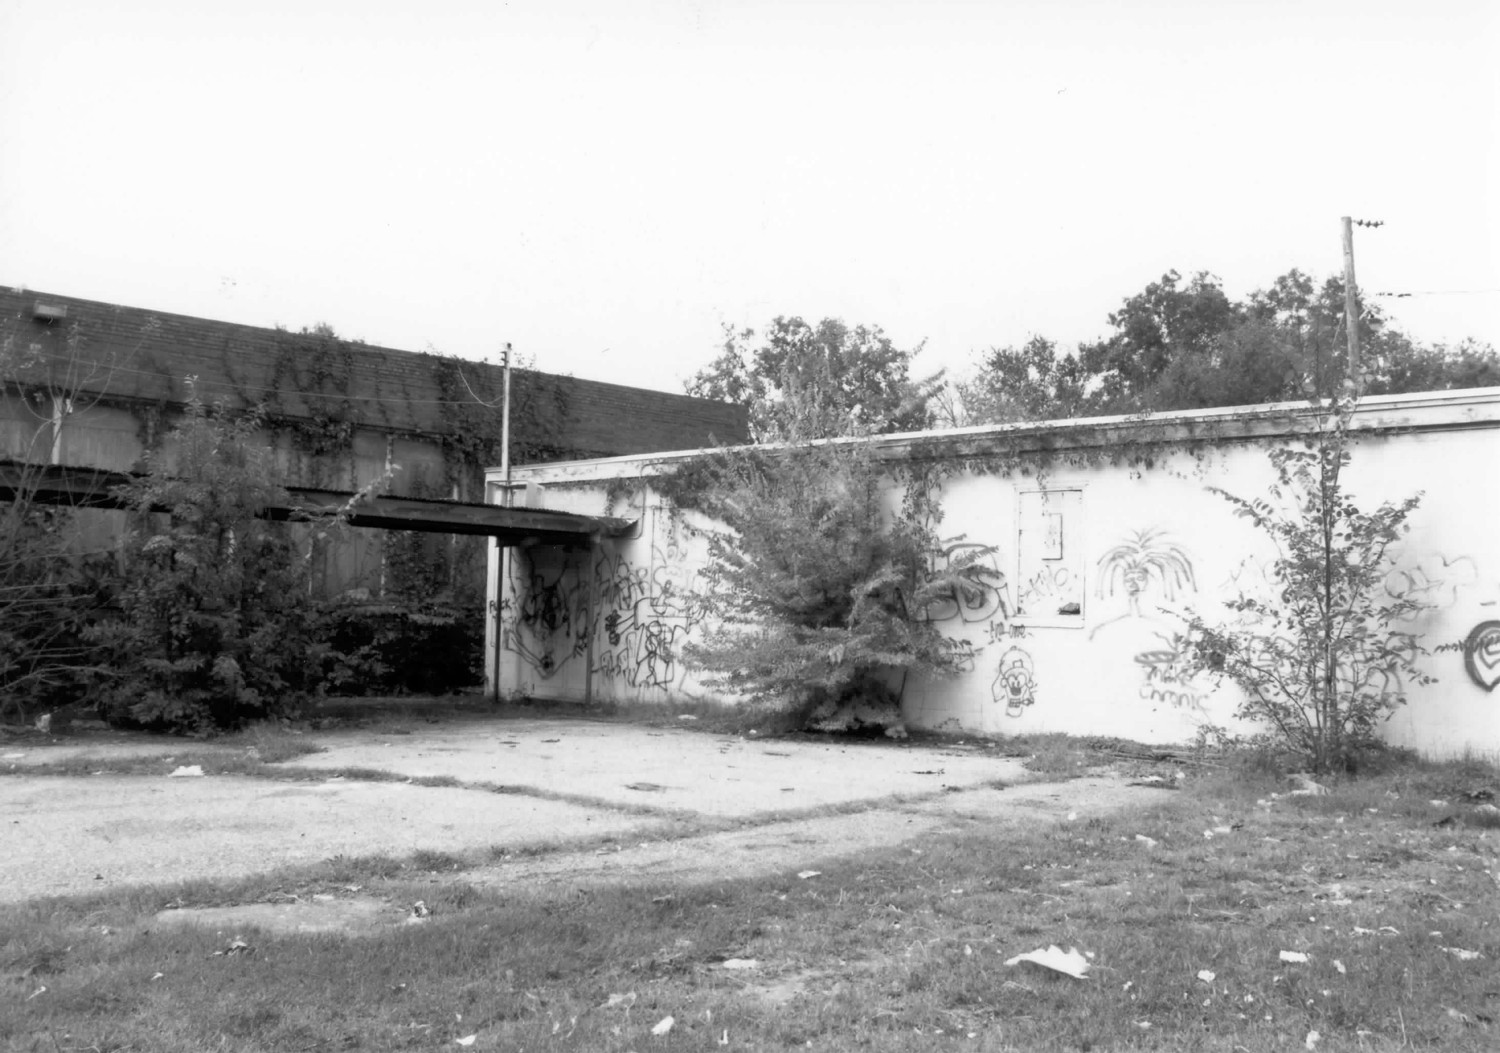 John T. West School, Norfolk Virginia 1950 addition and music room, looking southwest (1999)